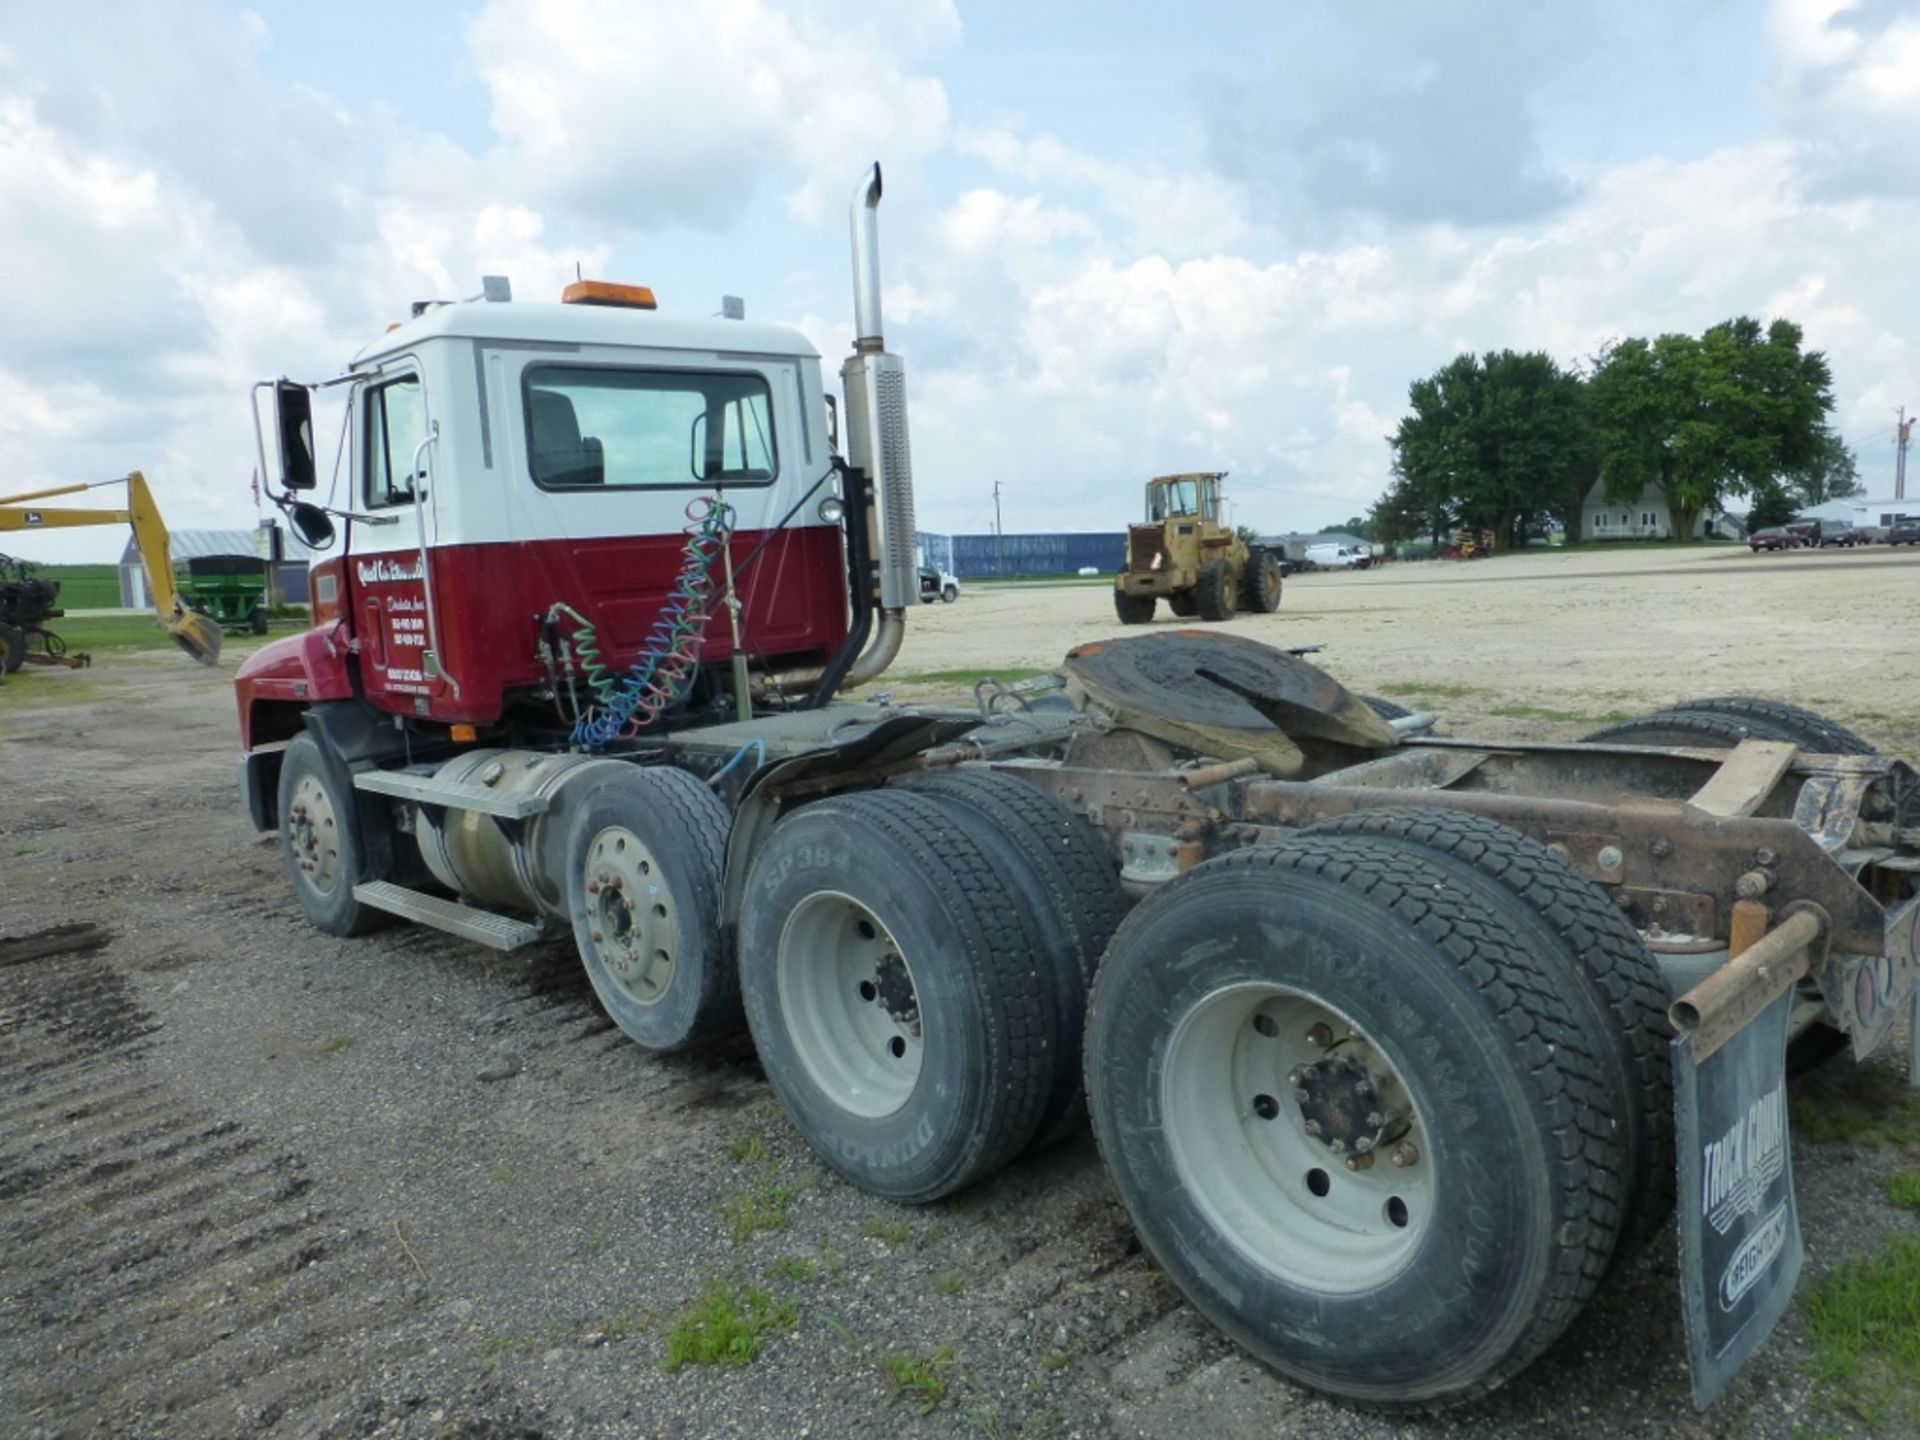 2000 Mack Truck Country 613CH, 3 axle, day cab, MaxiTorque T2090 9spd trans, Mack 335hp engine. E7- - Image 16 of 25